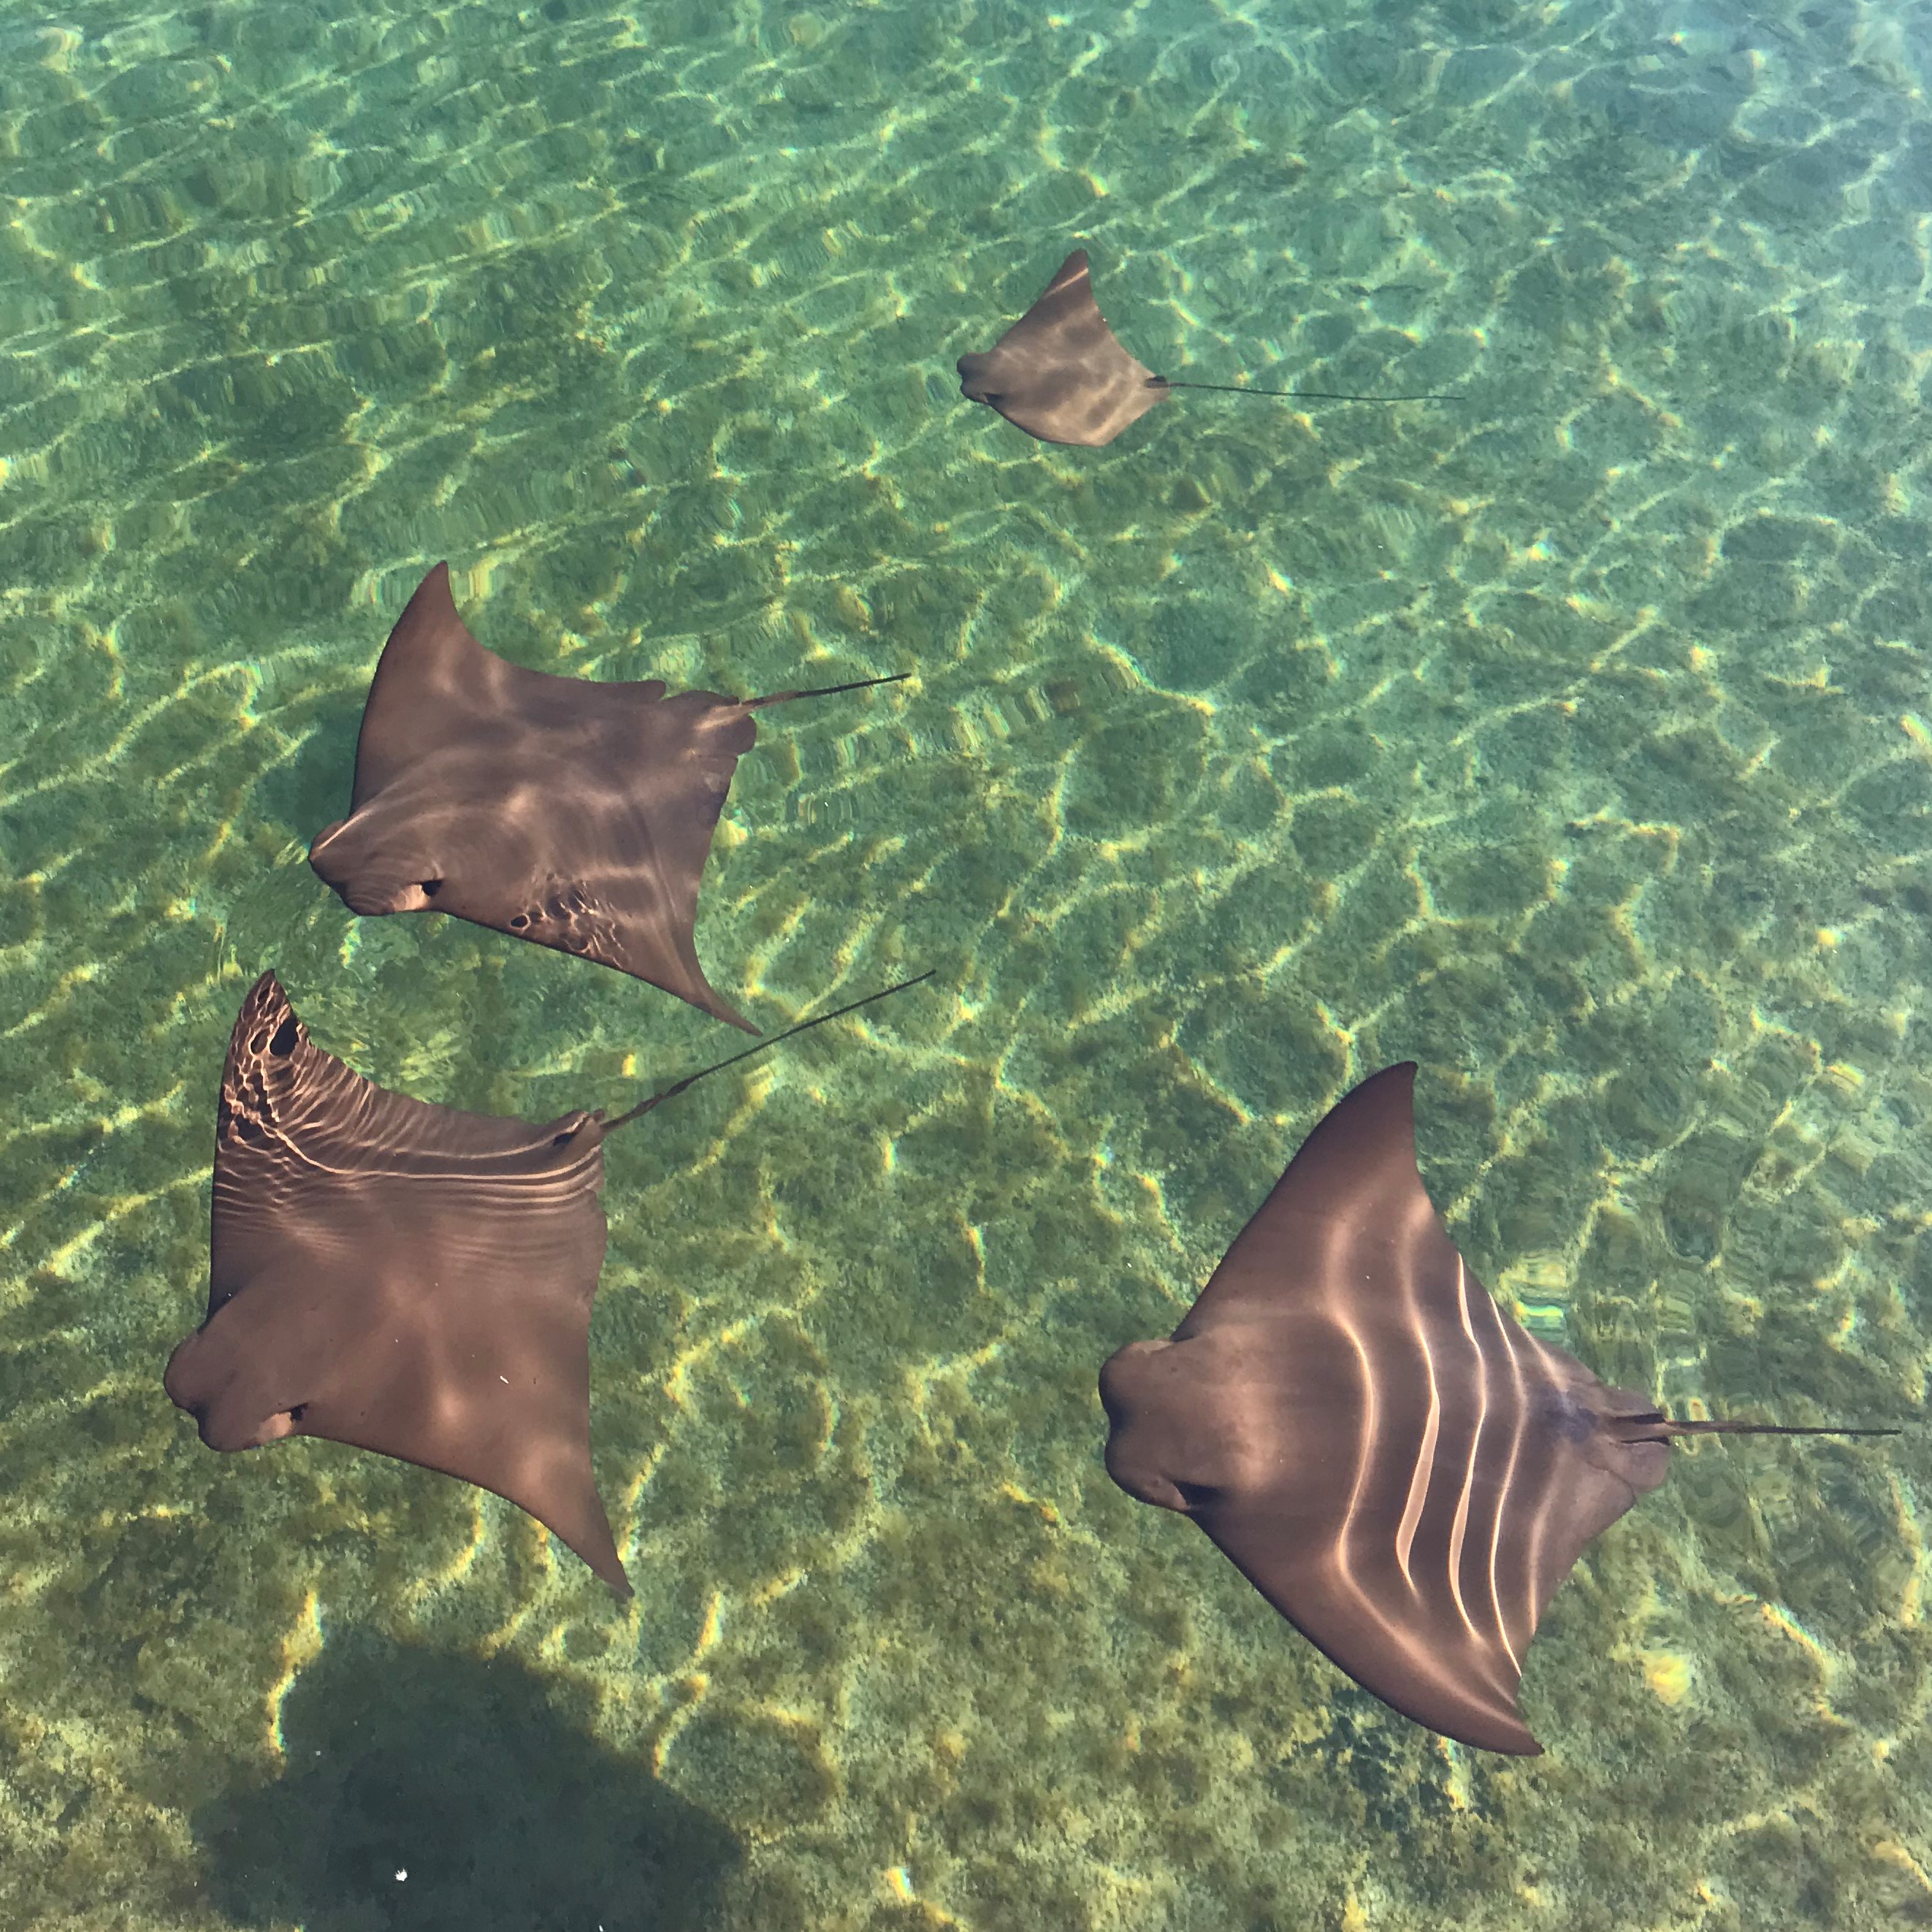 cownose ray